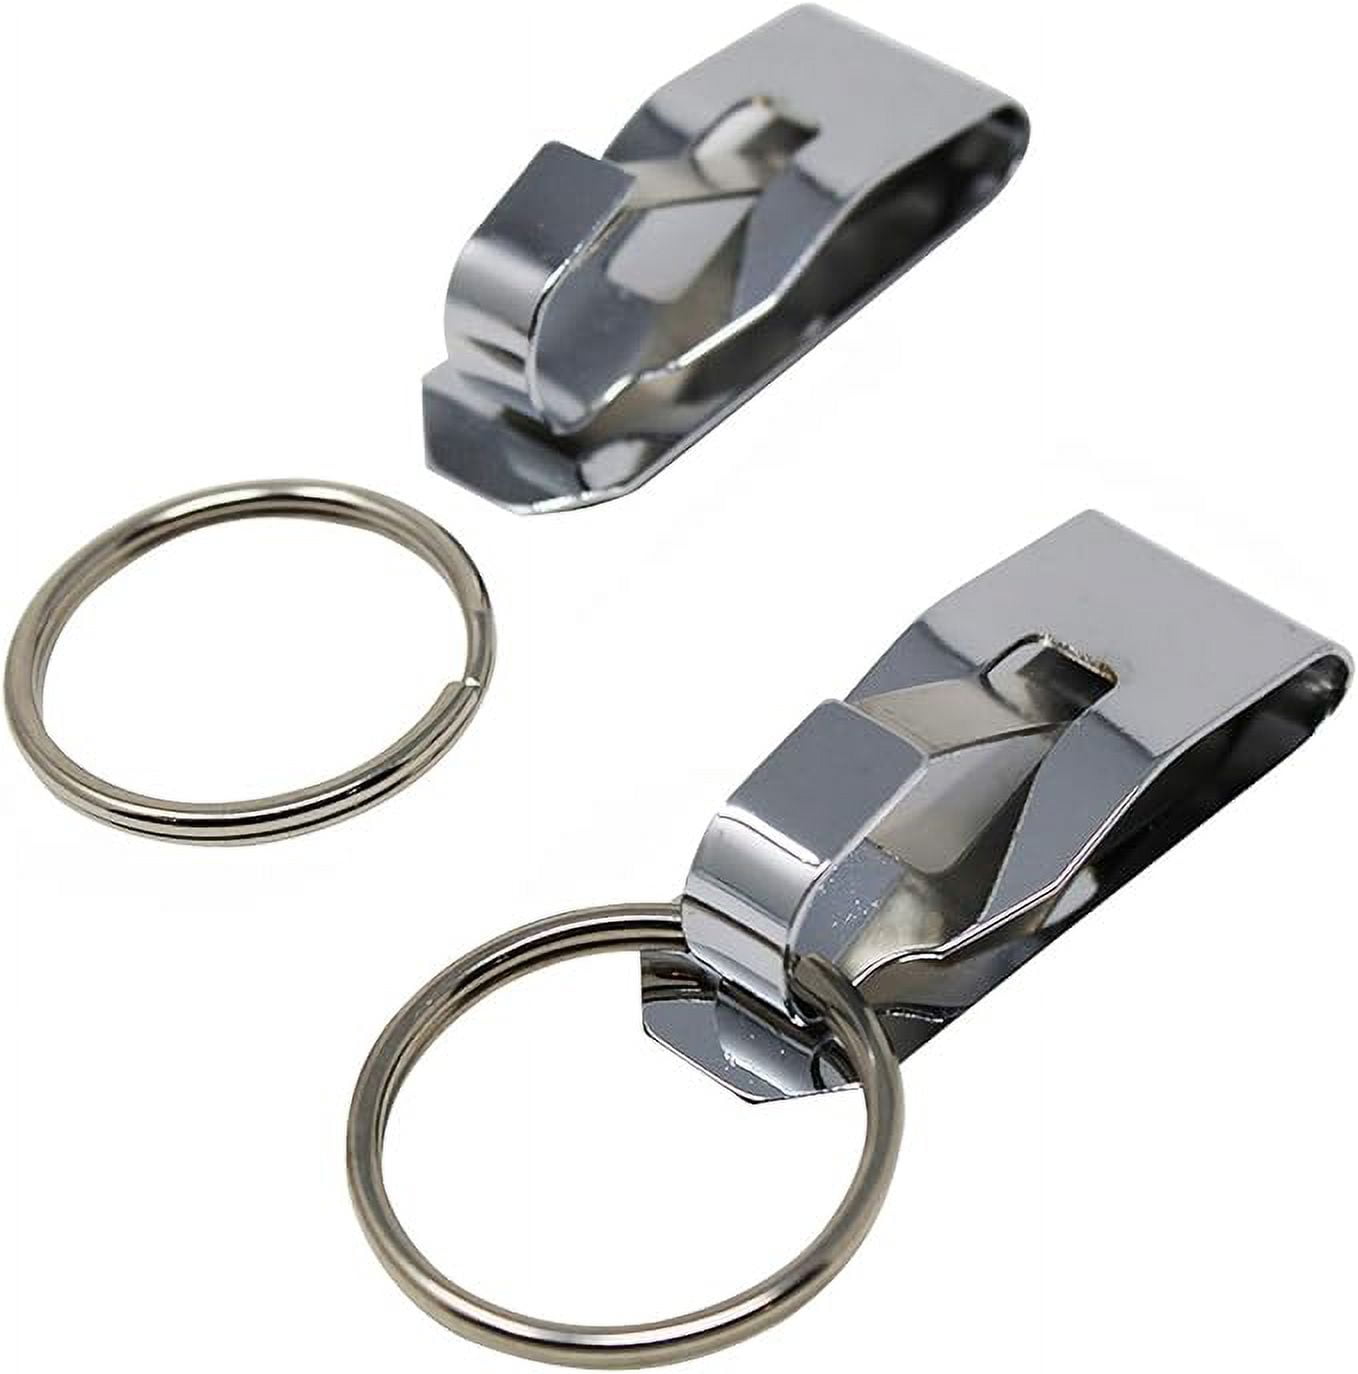 Star Trek Original Command Silver Color Metal Keychain Keyring with Clip